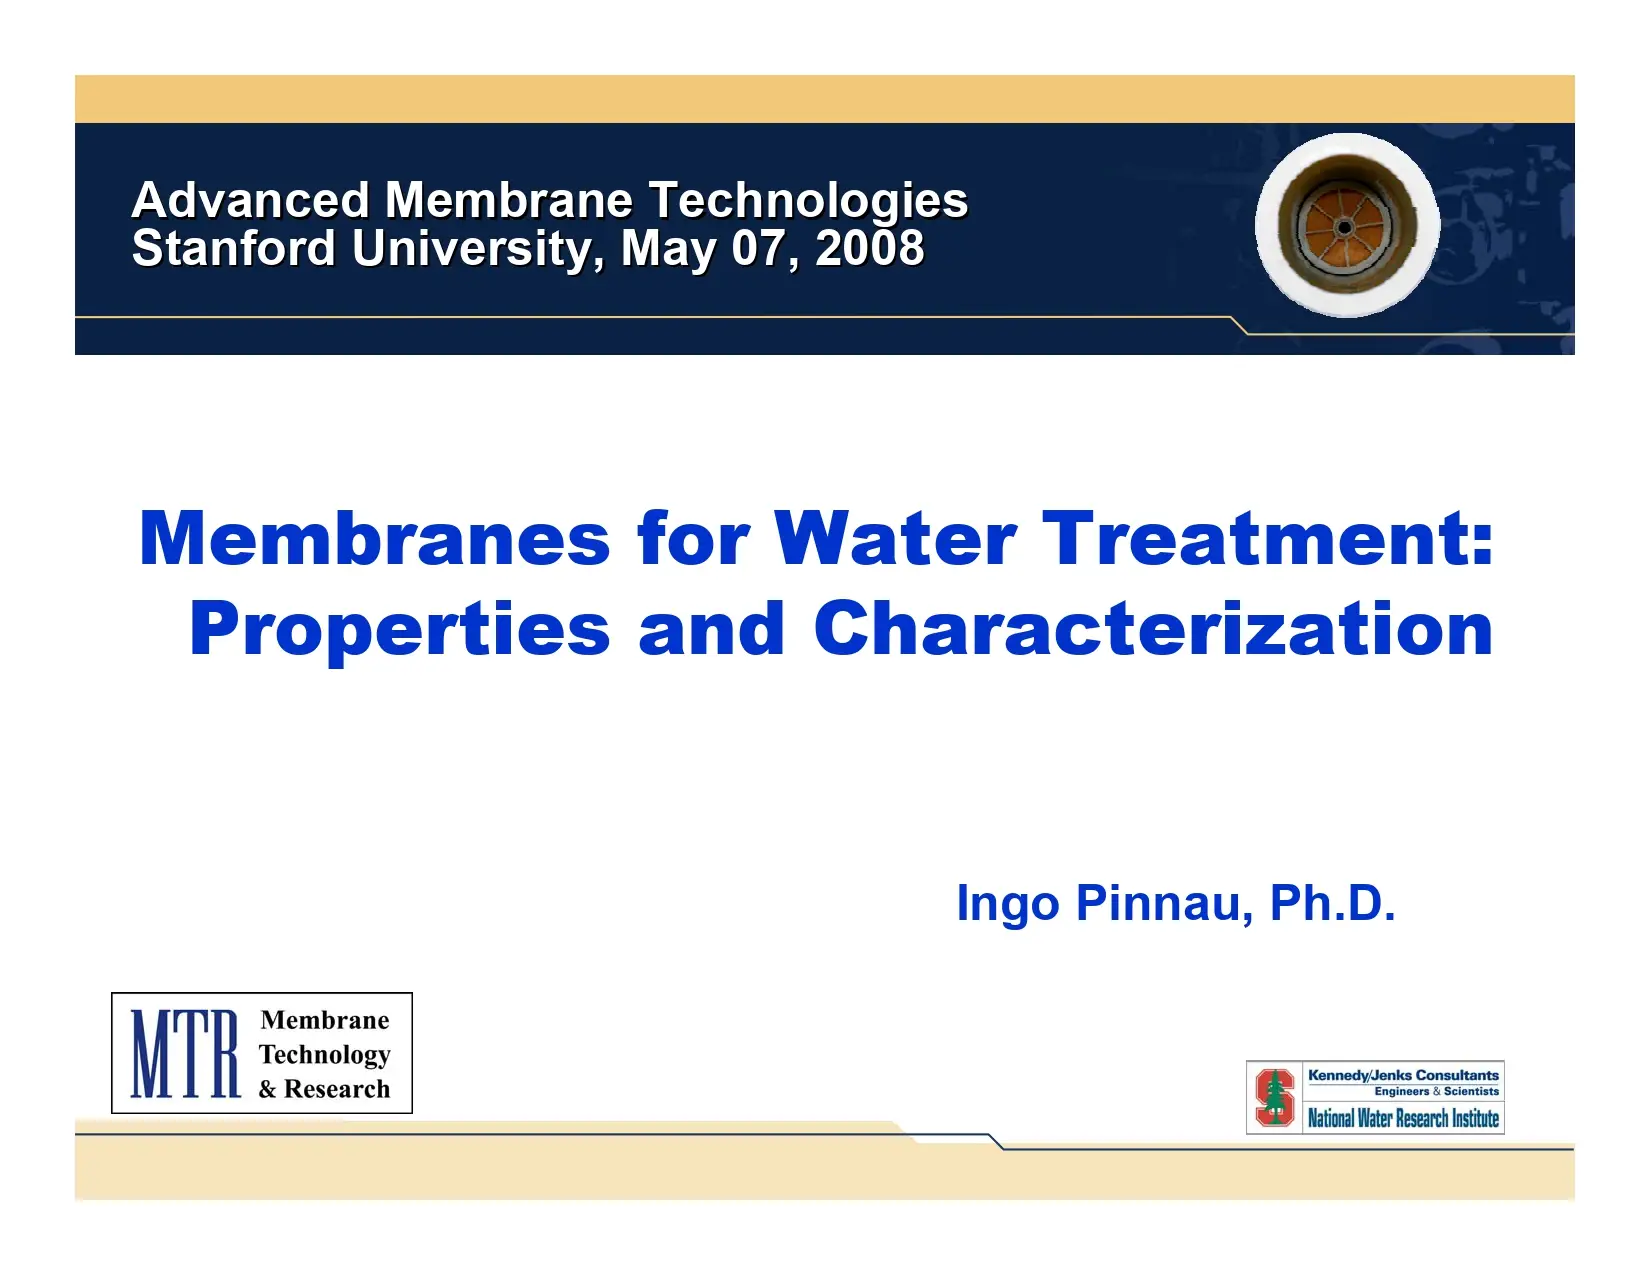 Membranes for Water Treatment: Properties and Characterization